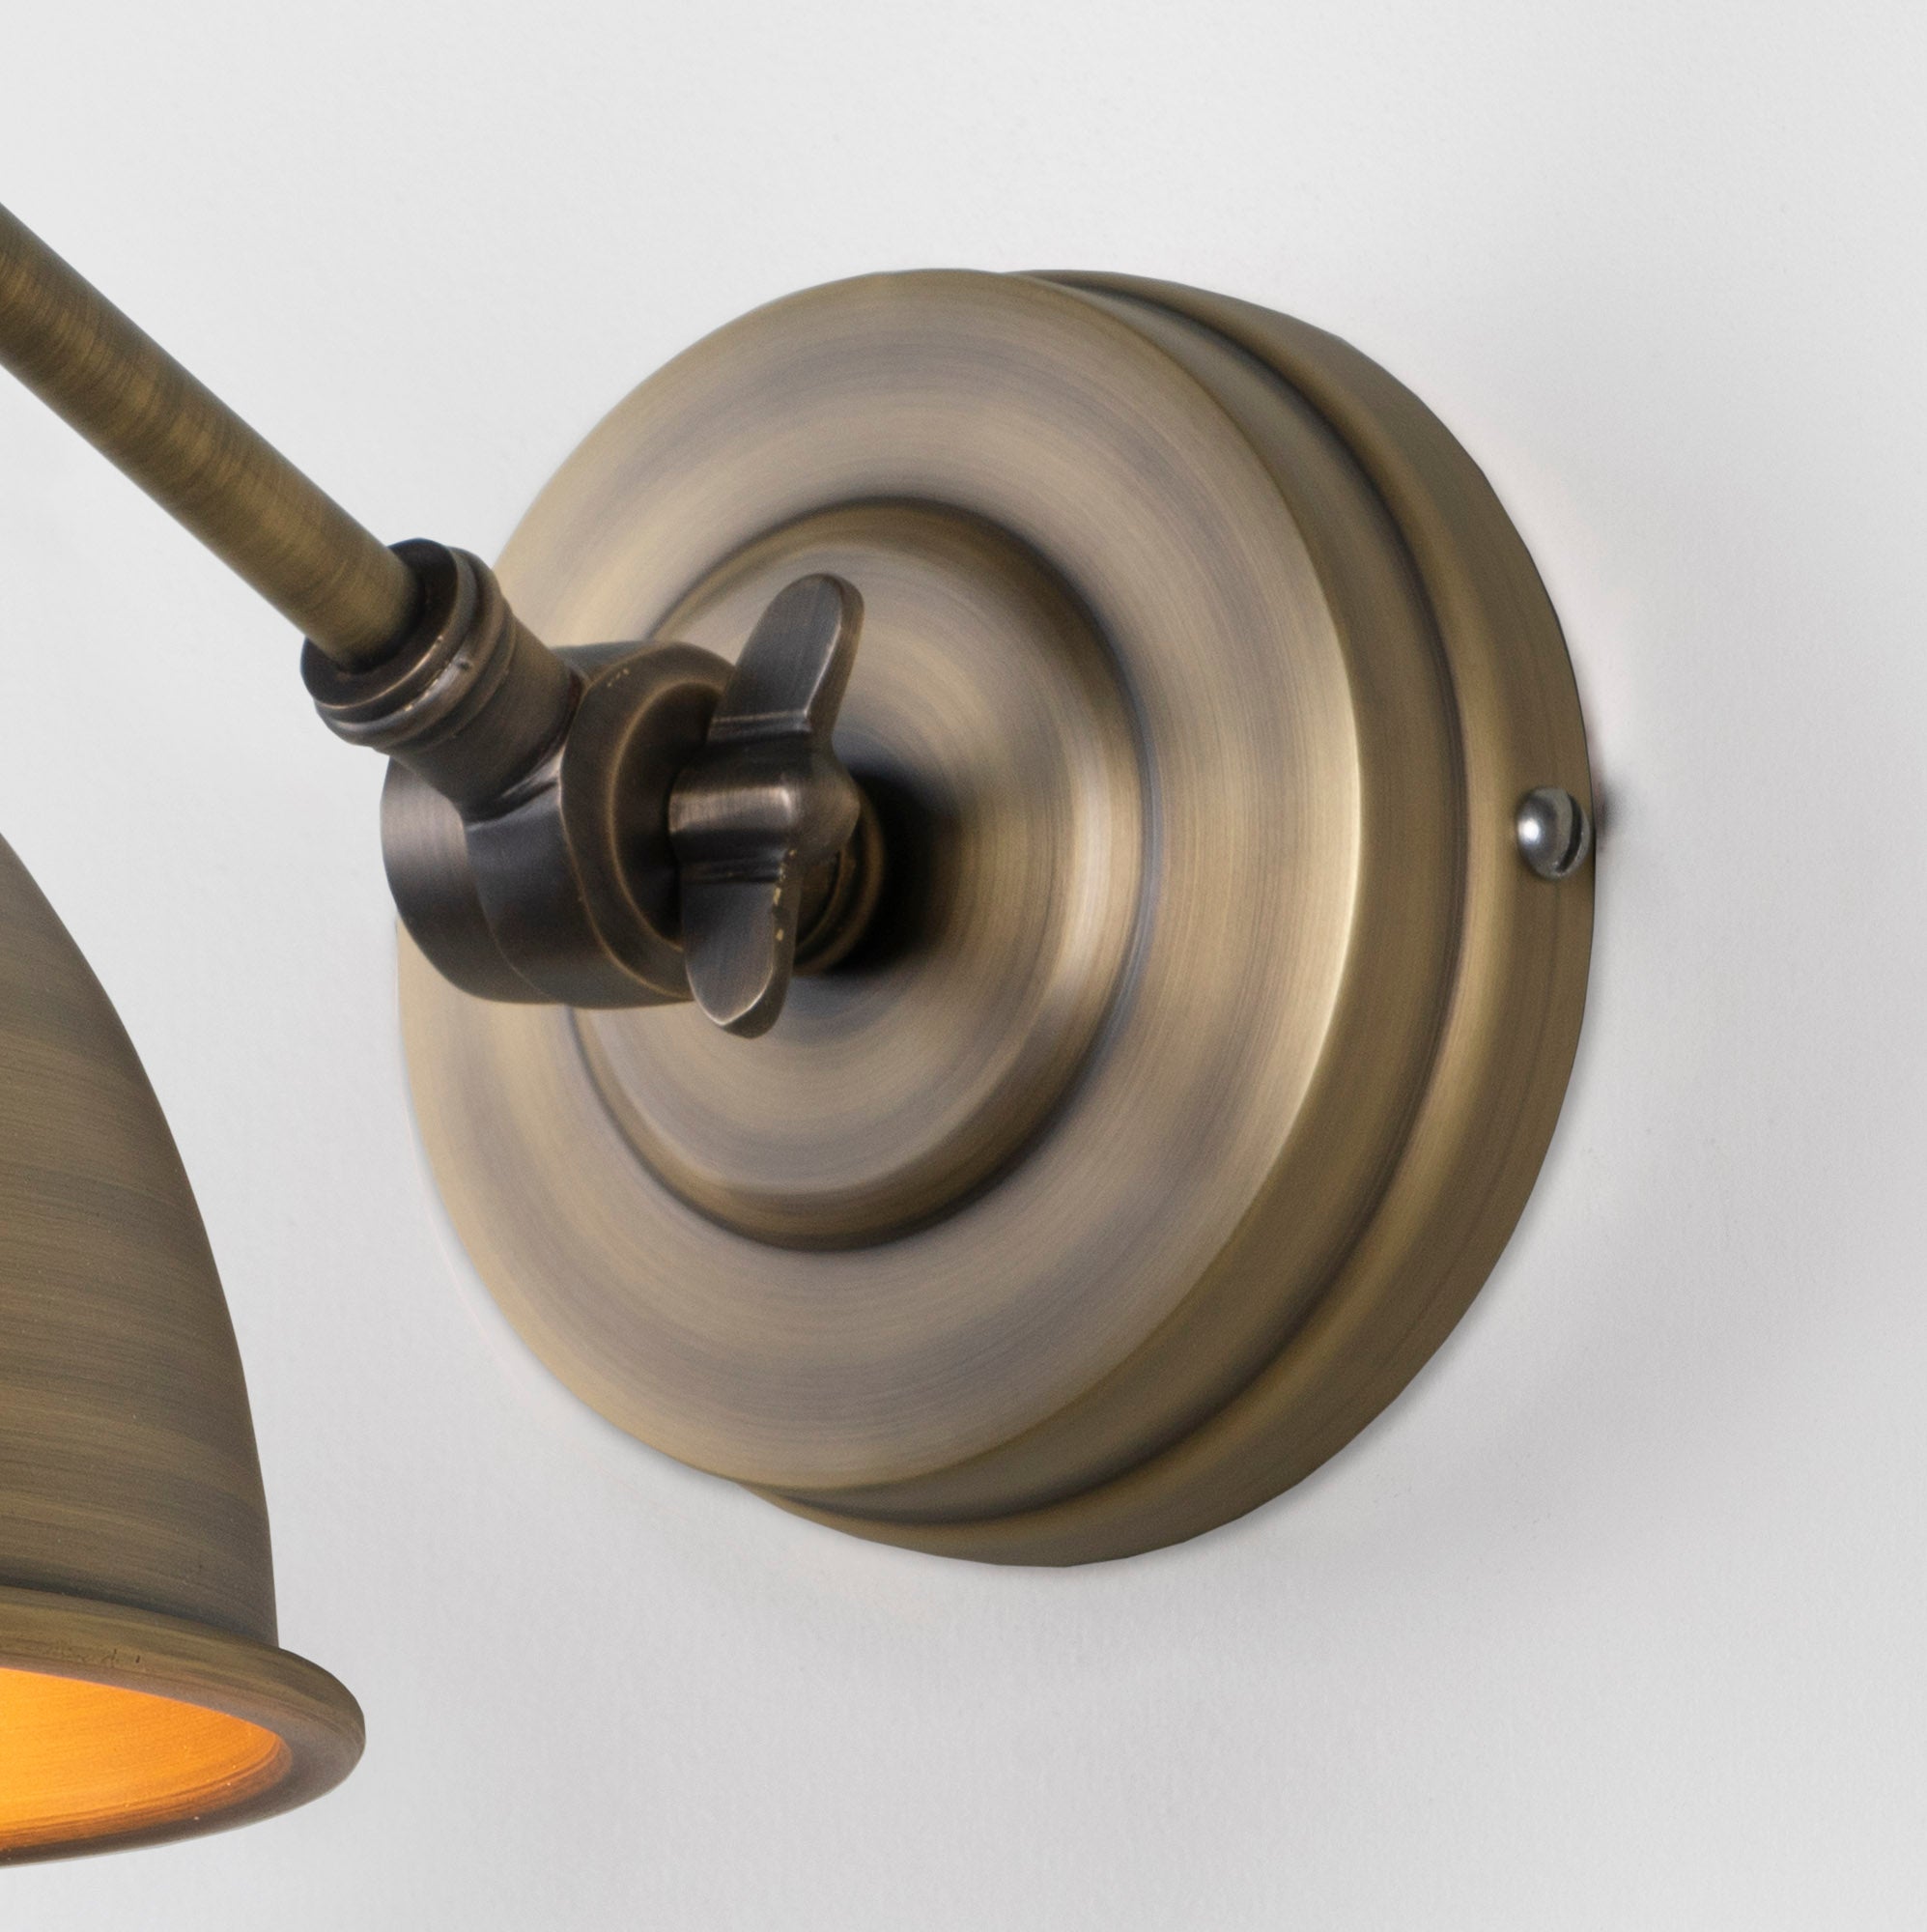 SHOW Close up Image of wall rose for Brindley Wall Light in Aged Brass